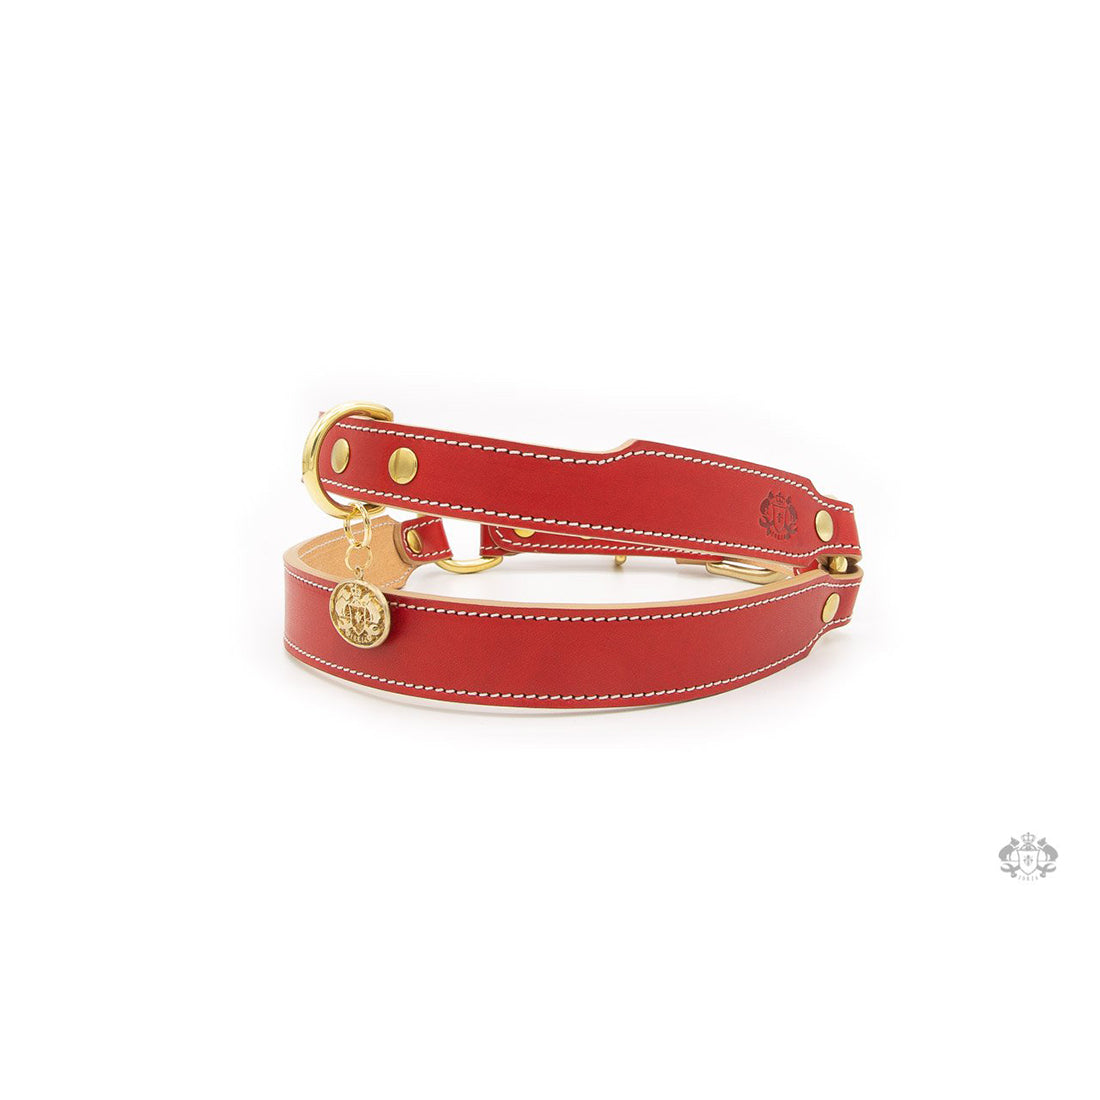 POPPY RED LEATHER DOG HARNESS